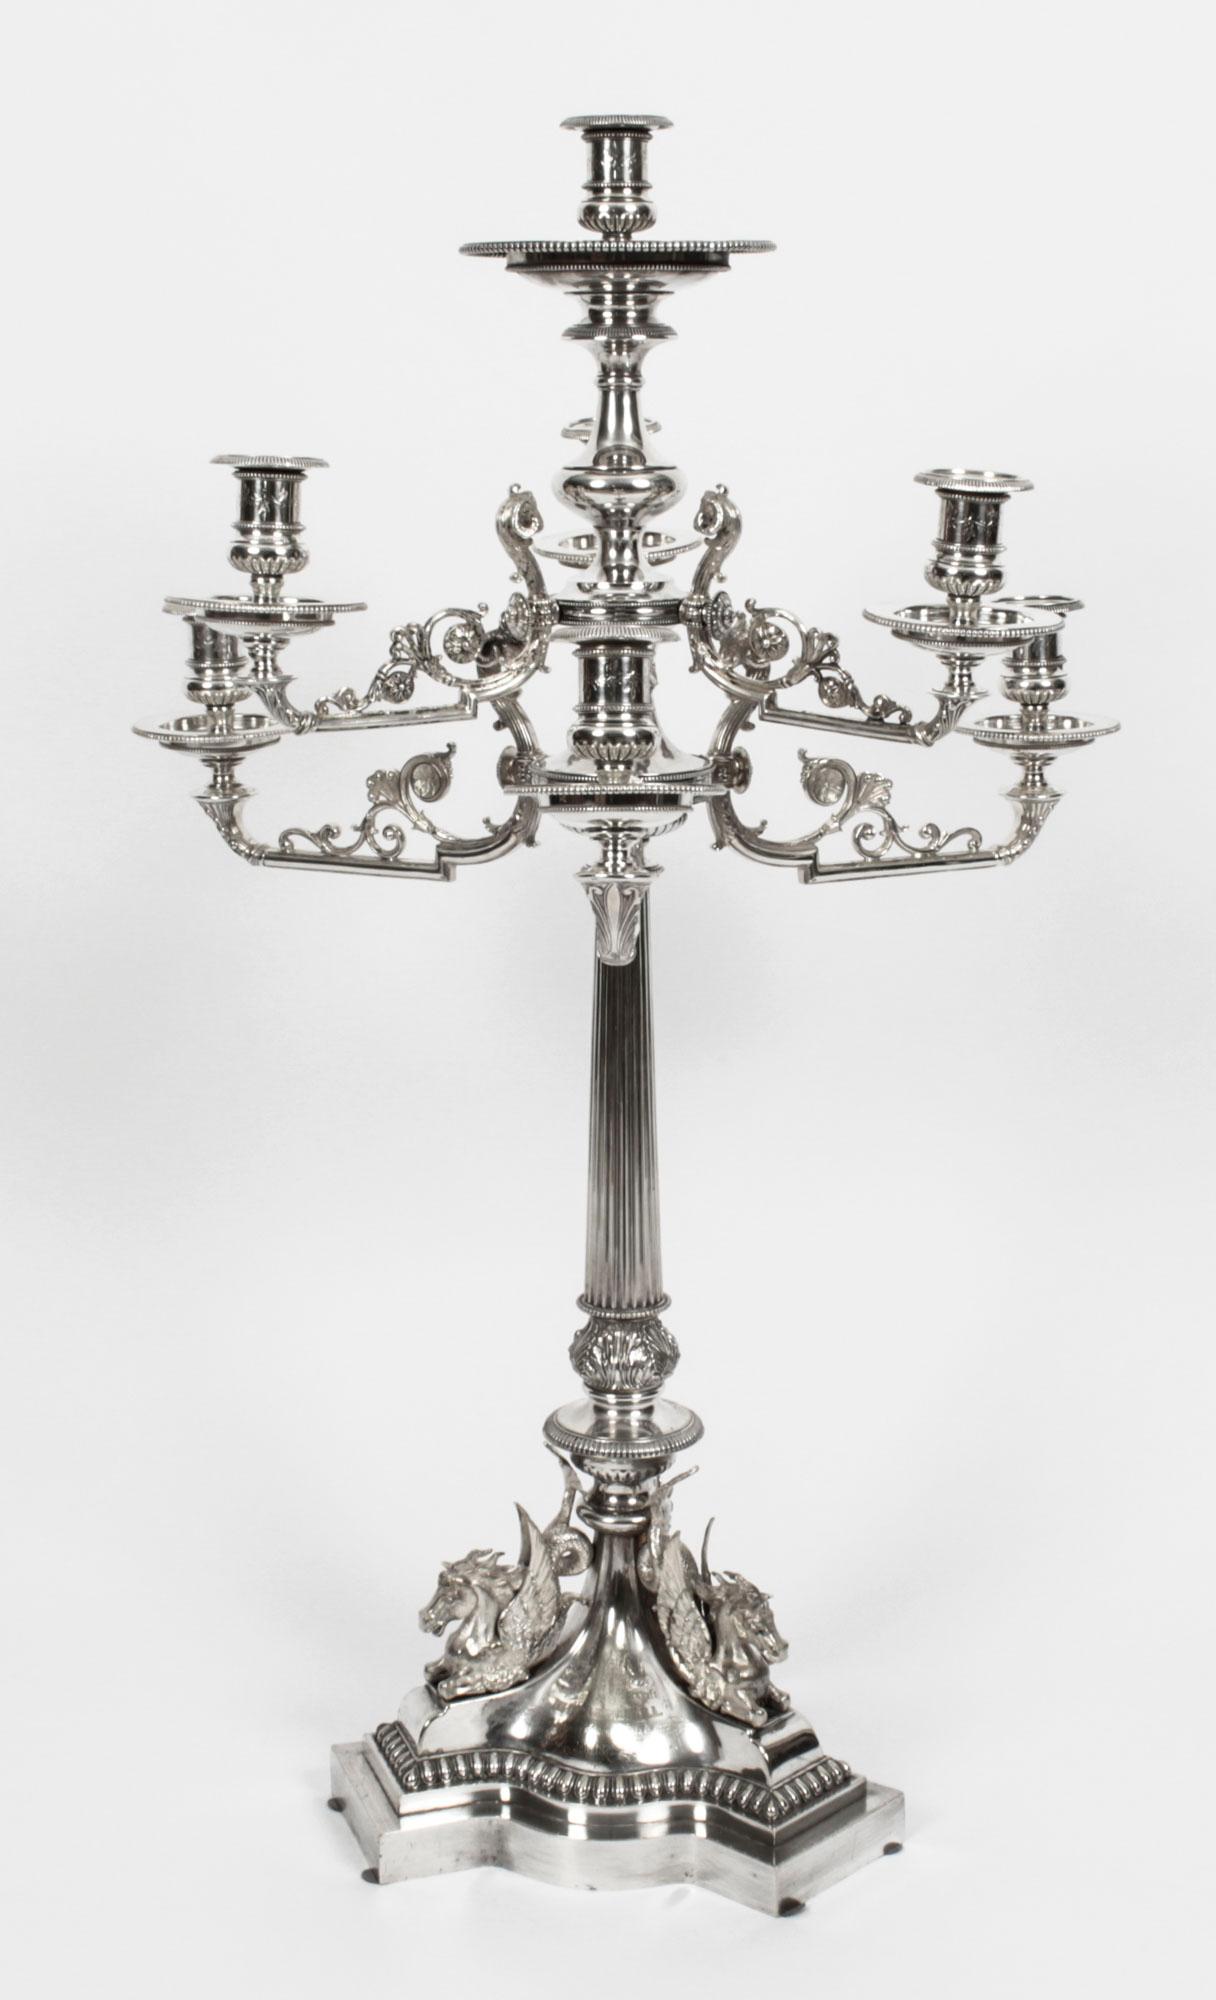 This is a magnificent and rare monumental antique English Victorian silver plated bronze figural candelabra centrepiece by the renowned silversmiths Elkington, Circa 1860 in date.

It is a superb quality monumental seven light cast candelabra with